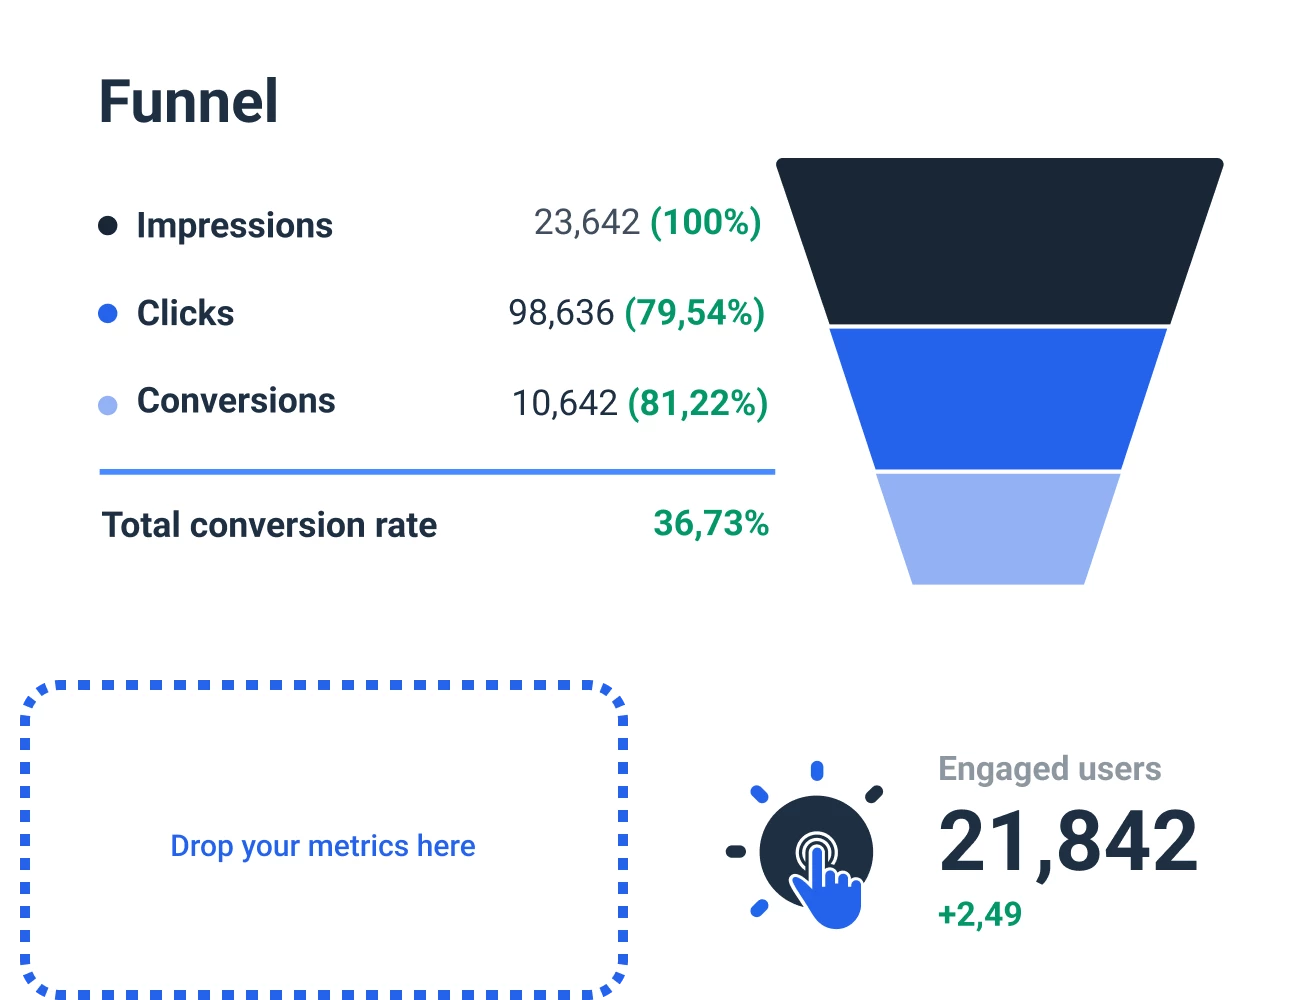 LinkedIn Analytics Dashboard Template to view the entire engagement funnel